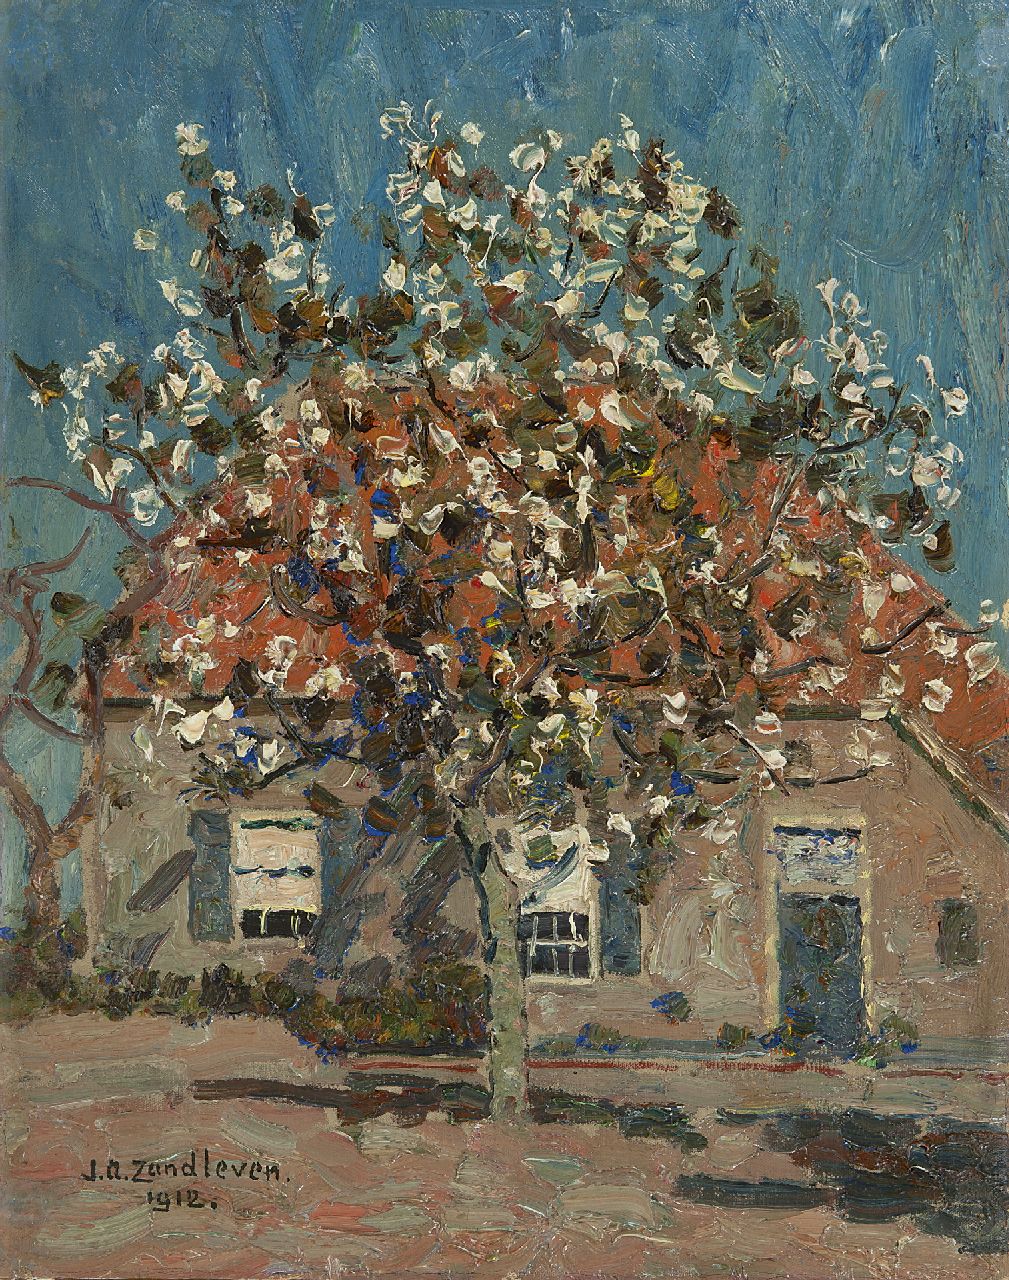 Zandleven J.A.  | Jan Adam Zandleven | Paintings offered for sale | Flowering fruit tree in front of a farm, oil on canvas laid down on panel 40.2 x 32.1 cm, signed l.l. and dated 1912